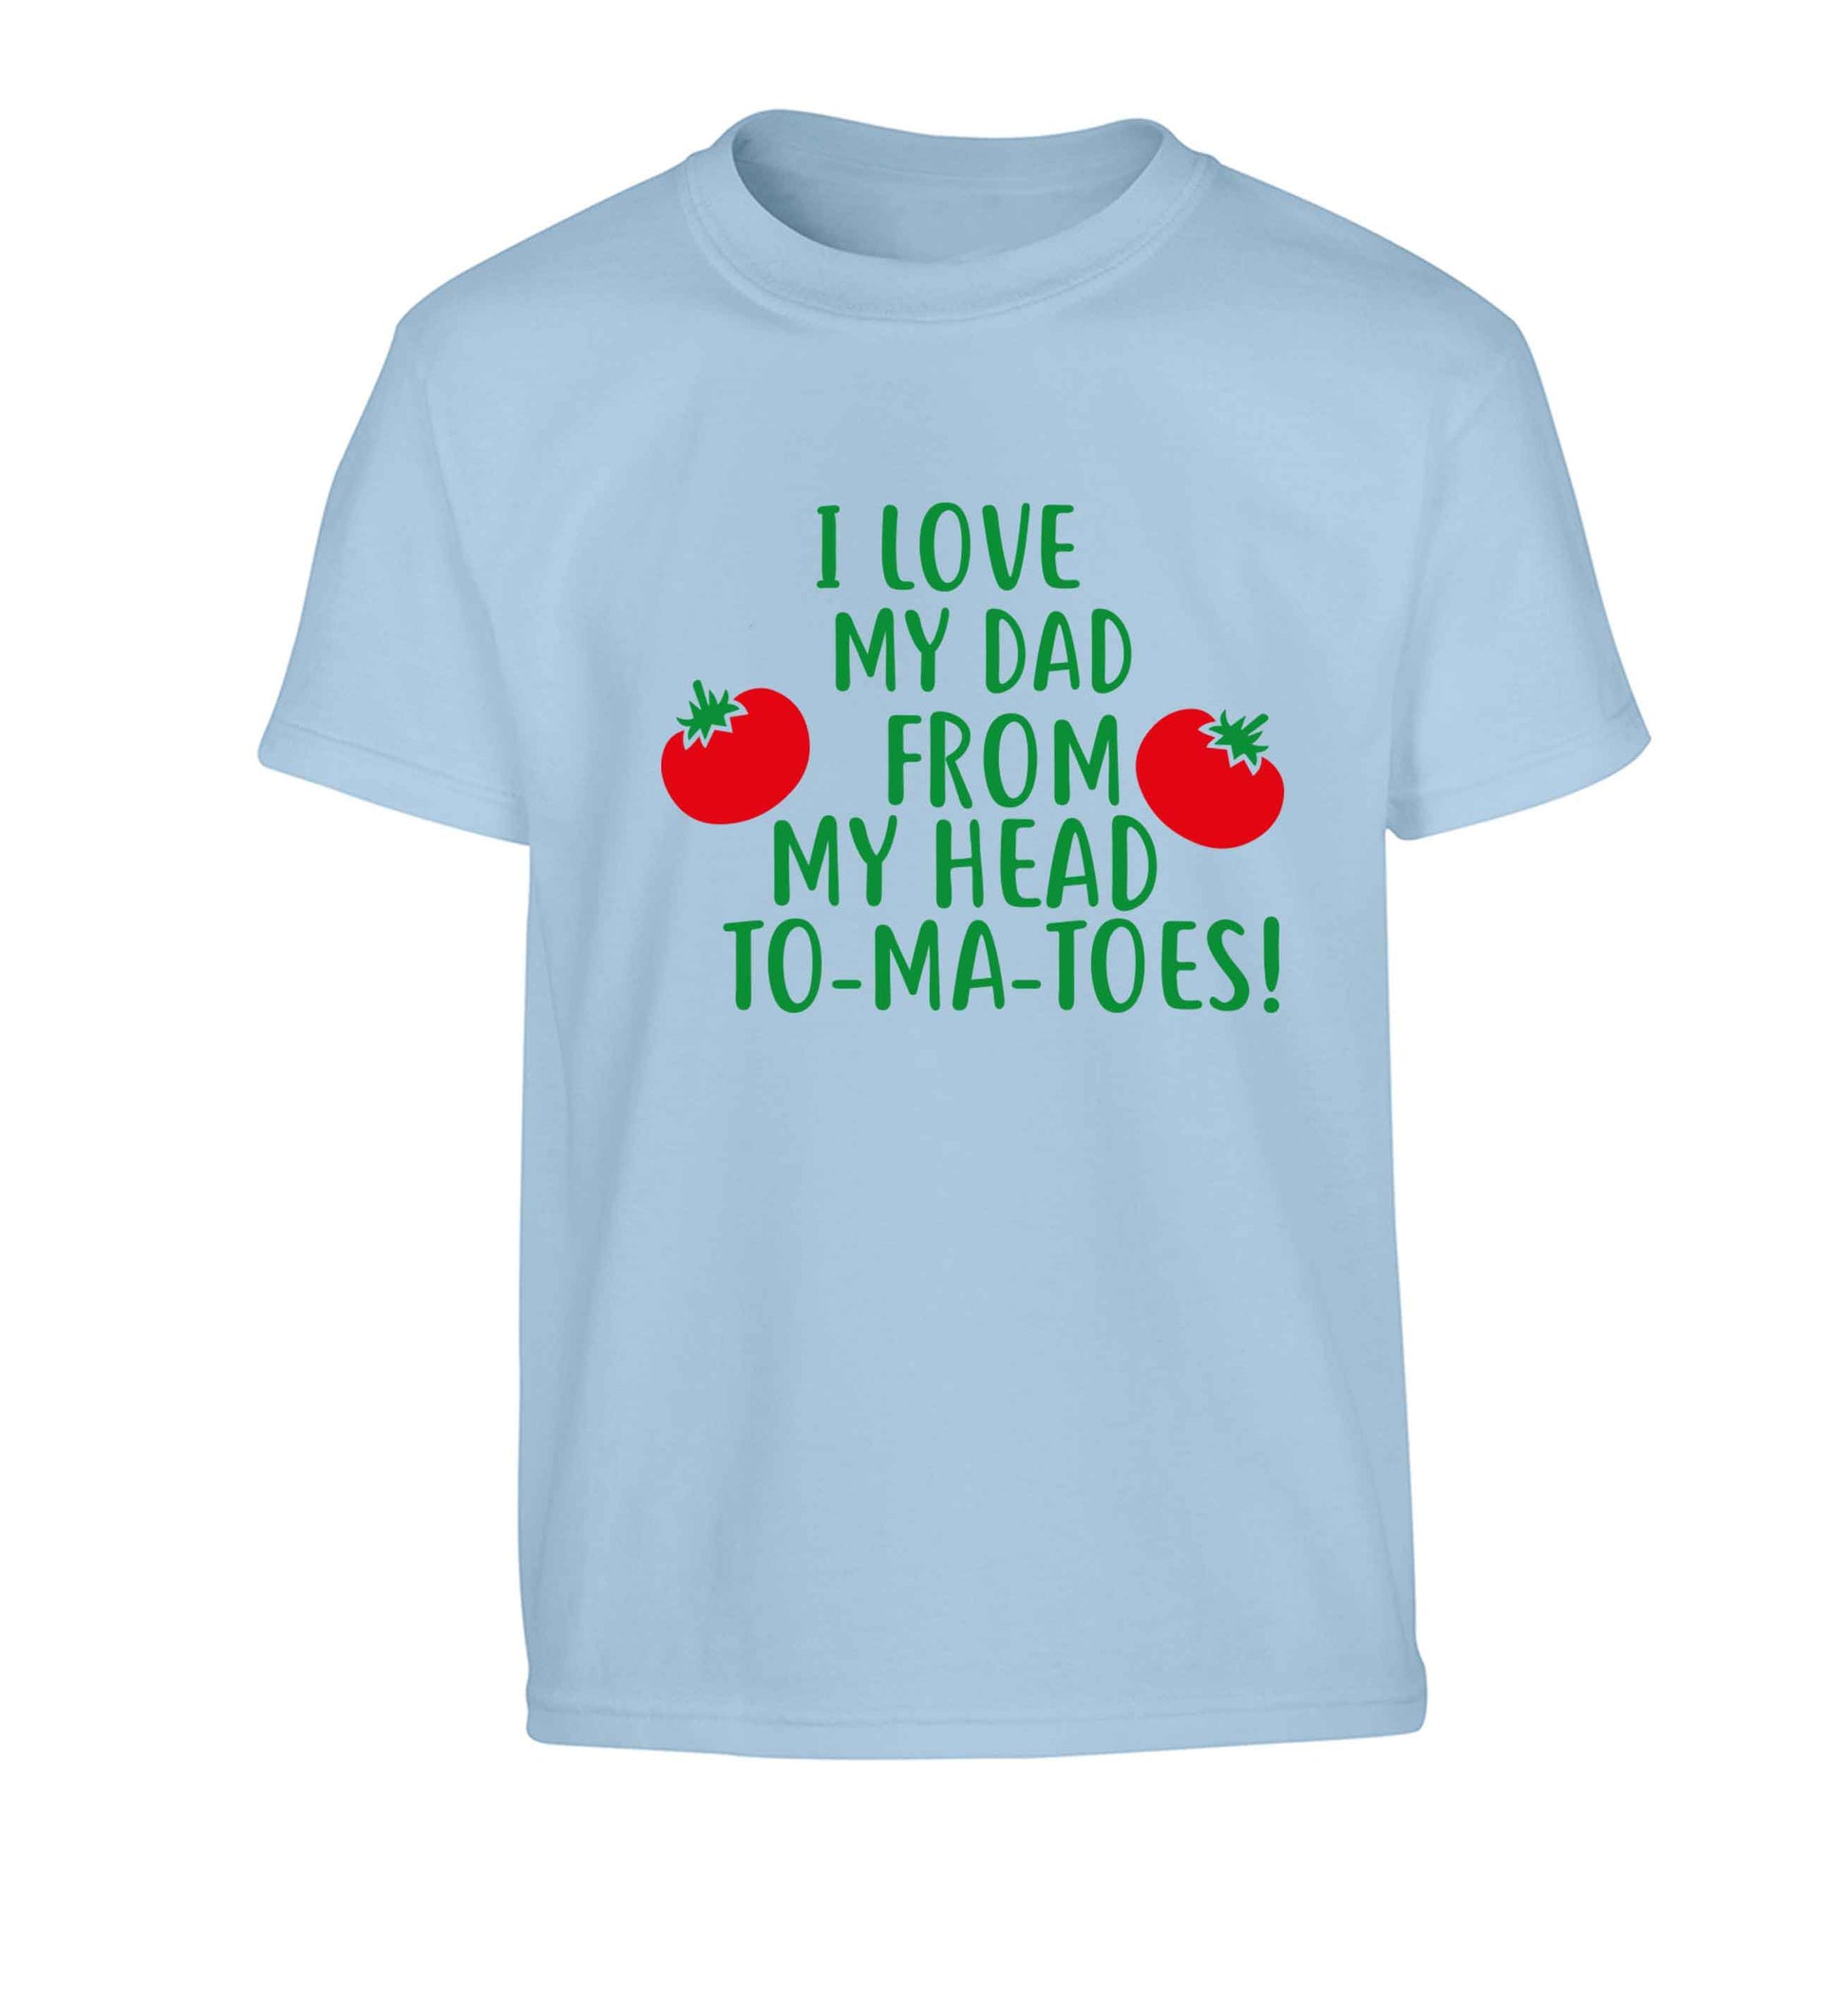 I love my dad from my head to-ma-toes Children's light blue Tshirt 12-13 Years